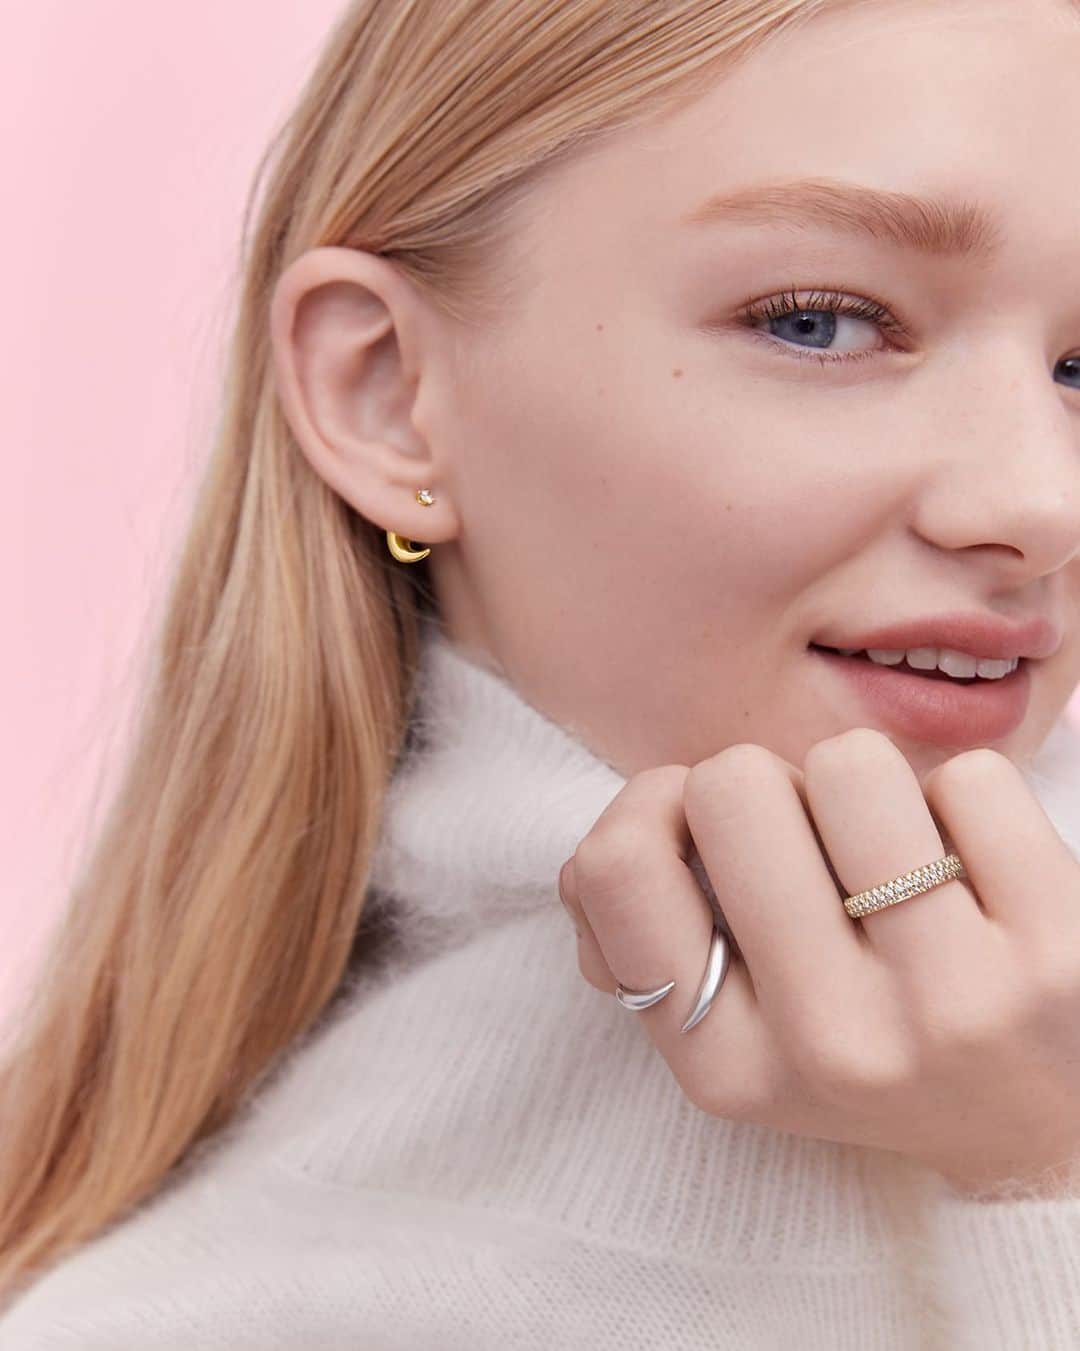 TASAKIのインスタグラム：「This year’s holiday collection introduces petite single earrings inspired by the popular ‘danger horn’ design. Celebrate the festive season with stunning and iconic jewellery featuring the horn design.  今年のホリデーコレクションは、「danger horn」の人気モデルをプチサイズにアレンジしたシングルイヤリングが登場。 ホーン (角)モチーフがアイコニックに艶めくジュエリーで、フェスティブなシーズンを祝って。  #TASAKI #Holiday #TASAKIdanger」